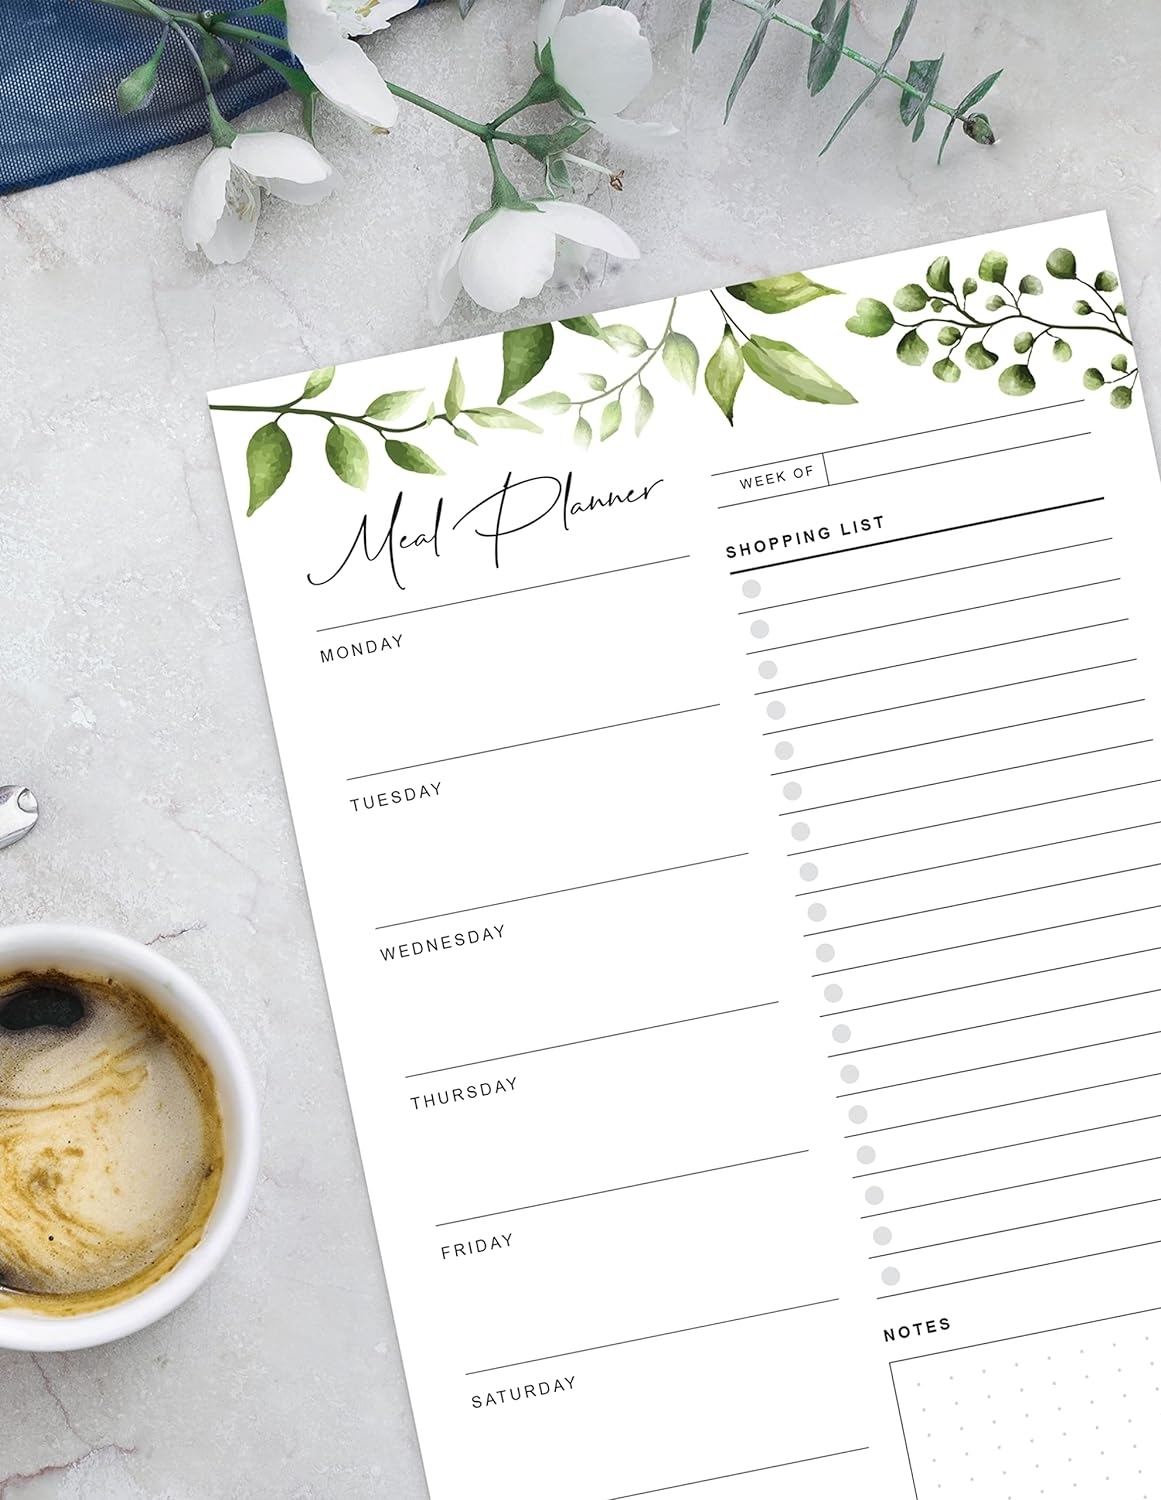 the meal planning pad next to a mug of coffee